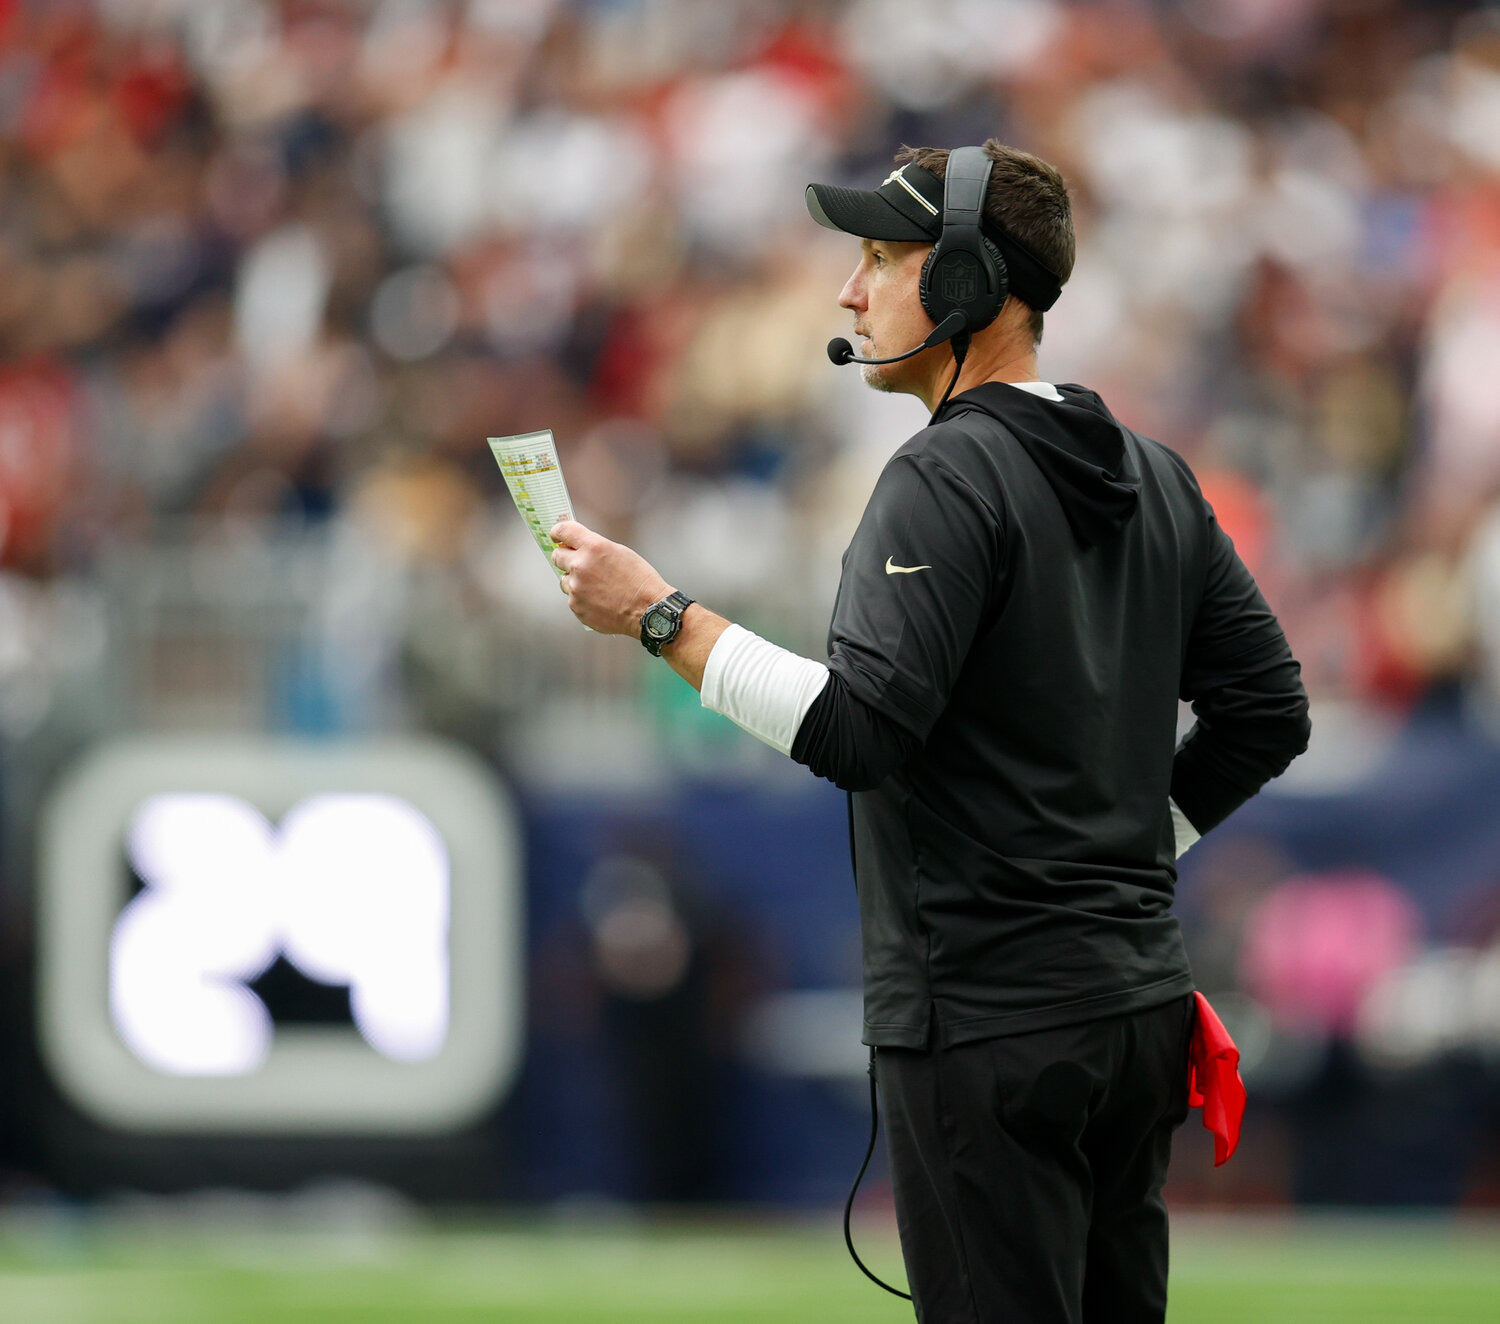 Saints head coach Dennis Allen during an NFL game between the Texans and the Saints on October 15, 2023 in Houston. The Texans won, 20-13.